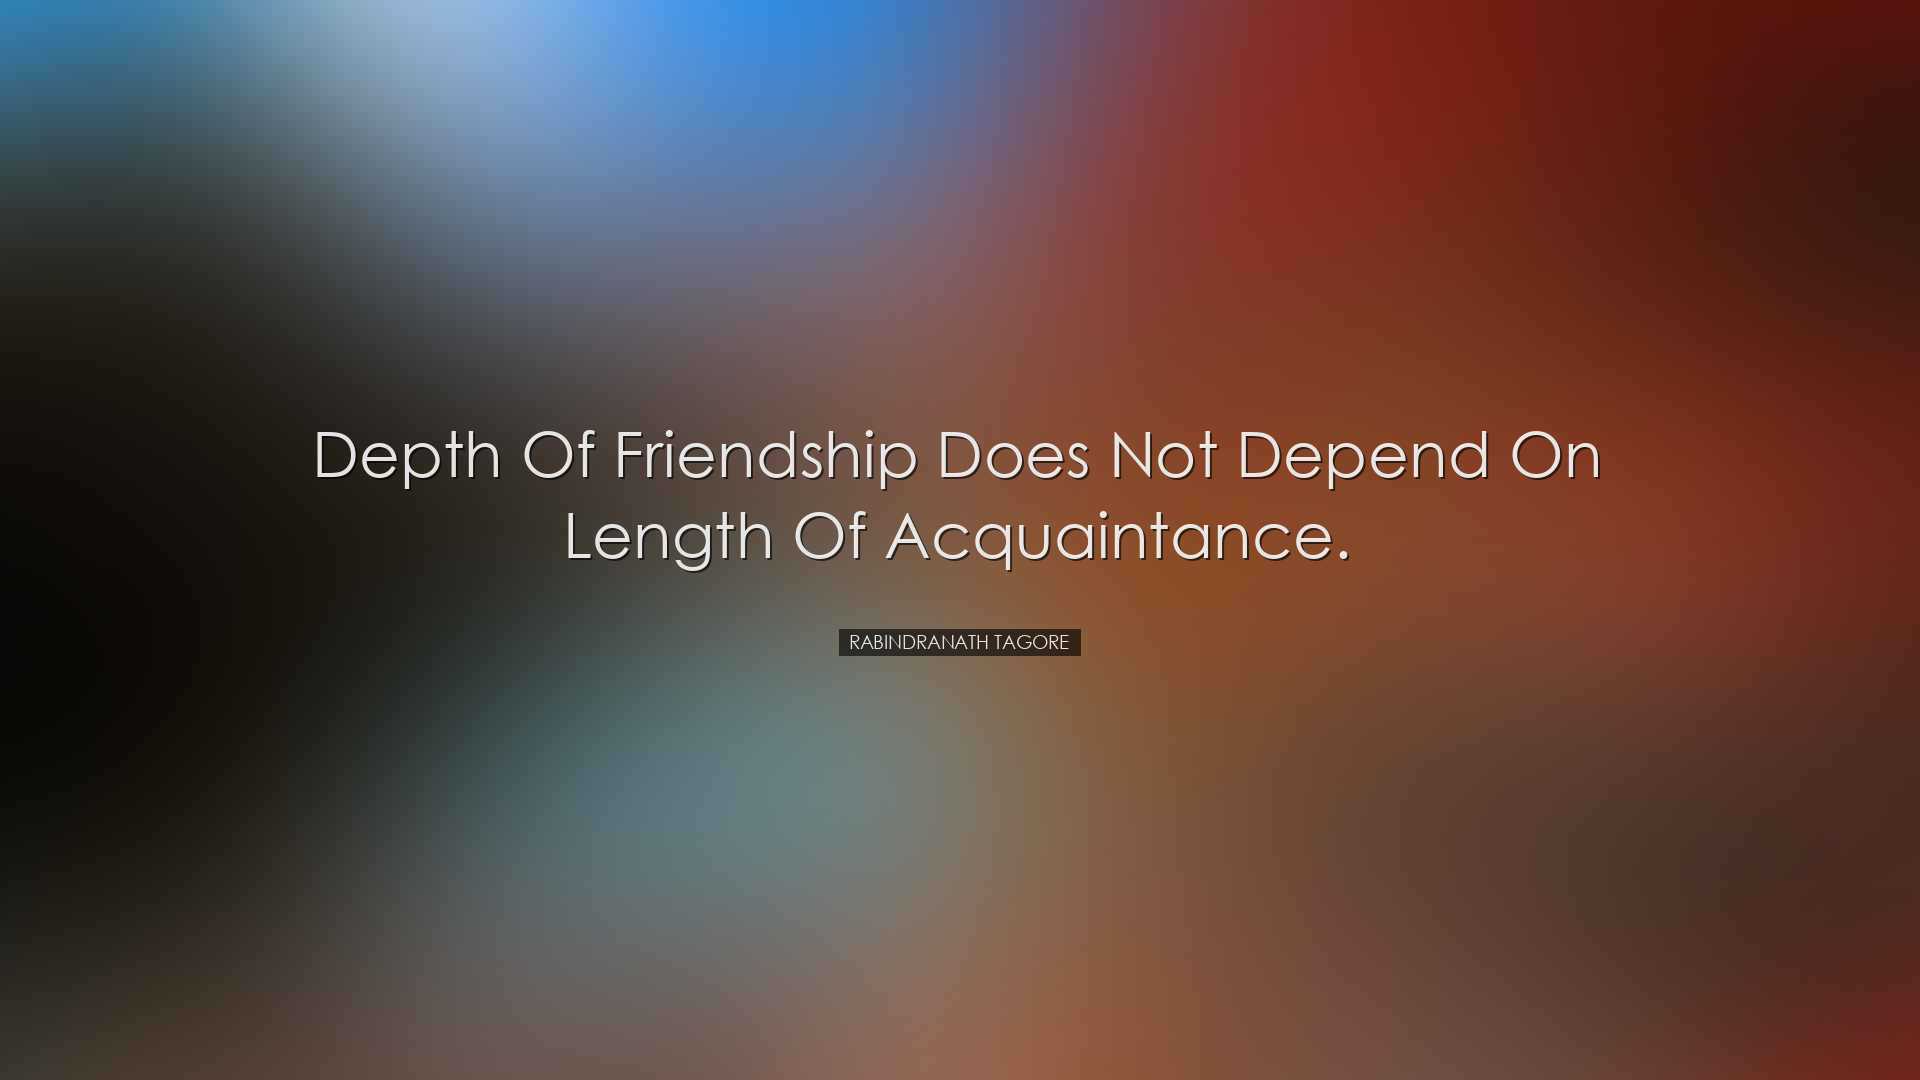 Depth of friendship does not depend on length of acquaintance. - R